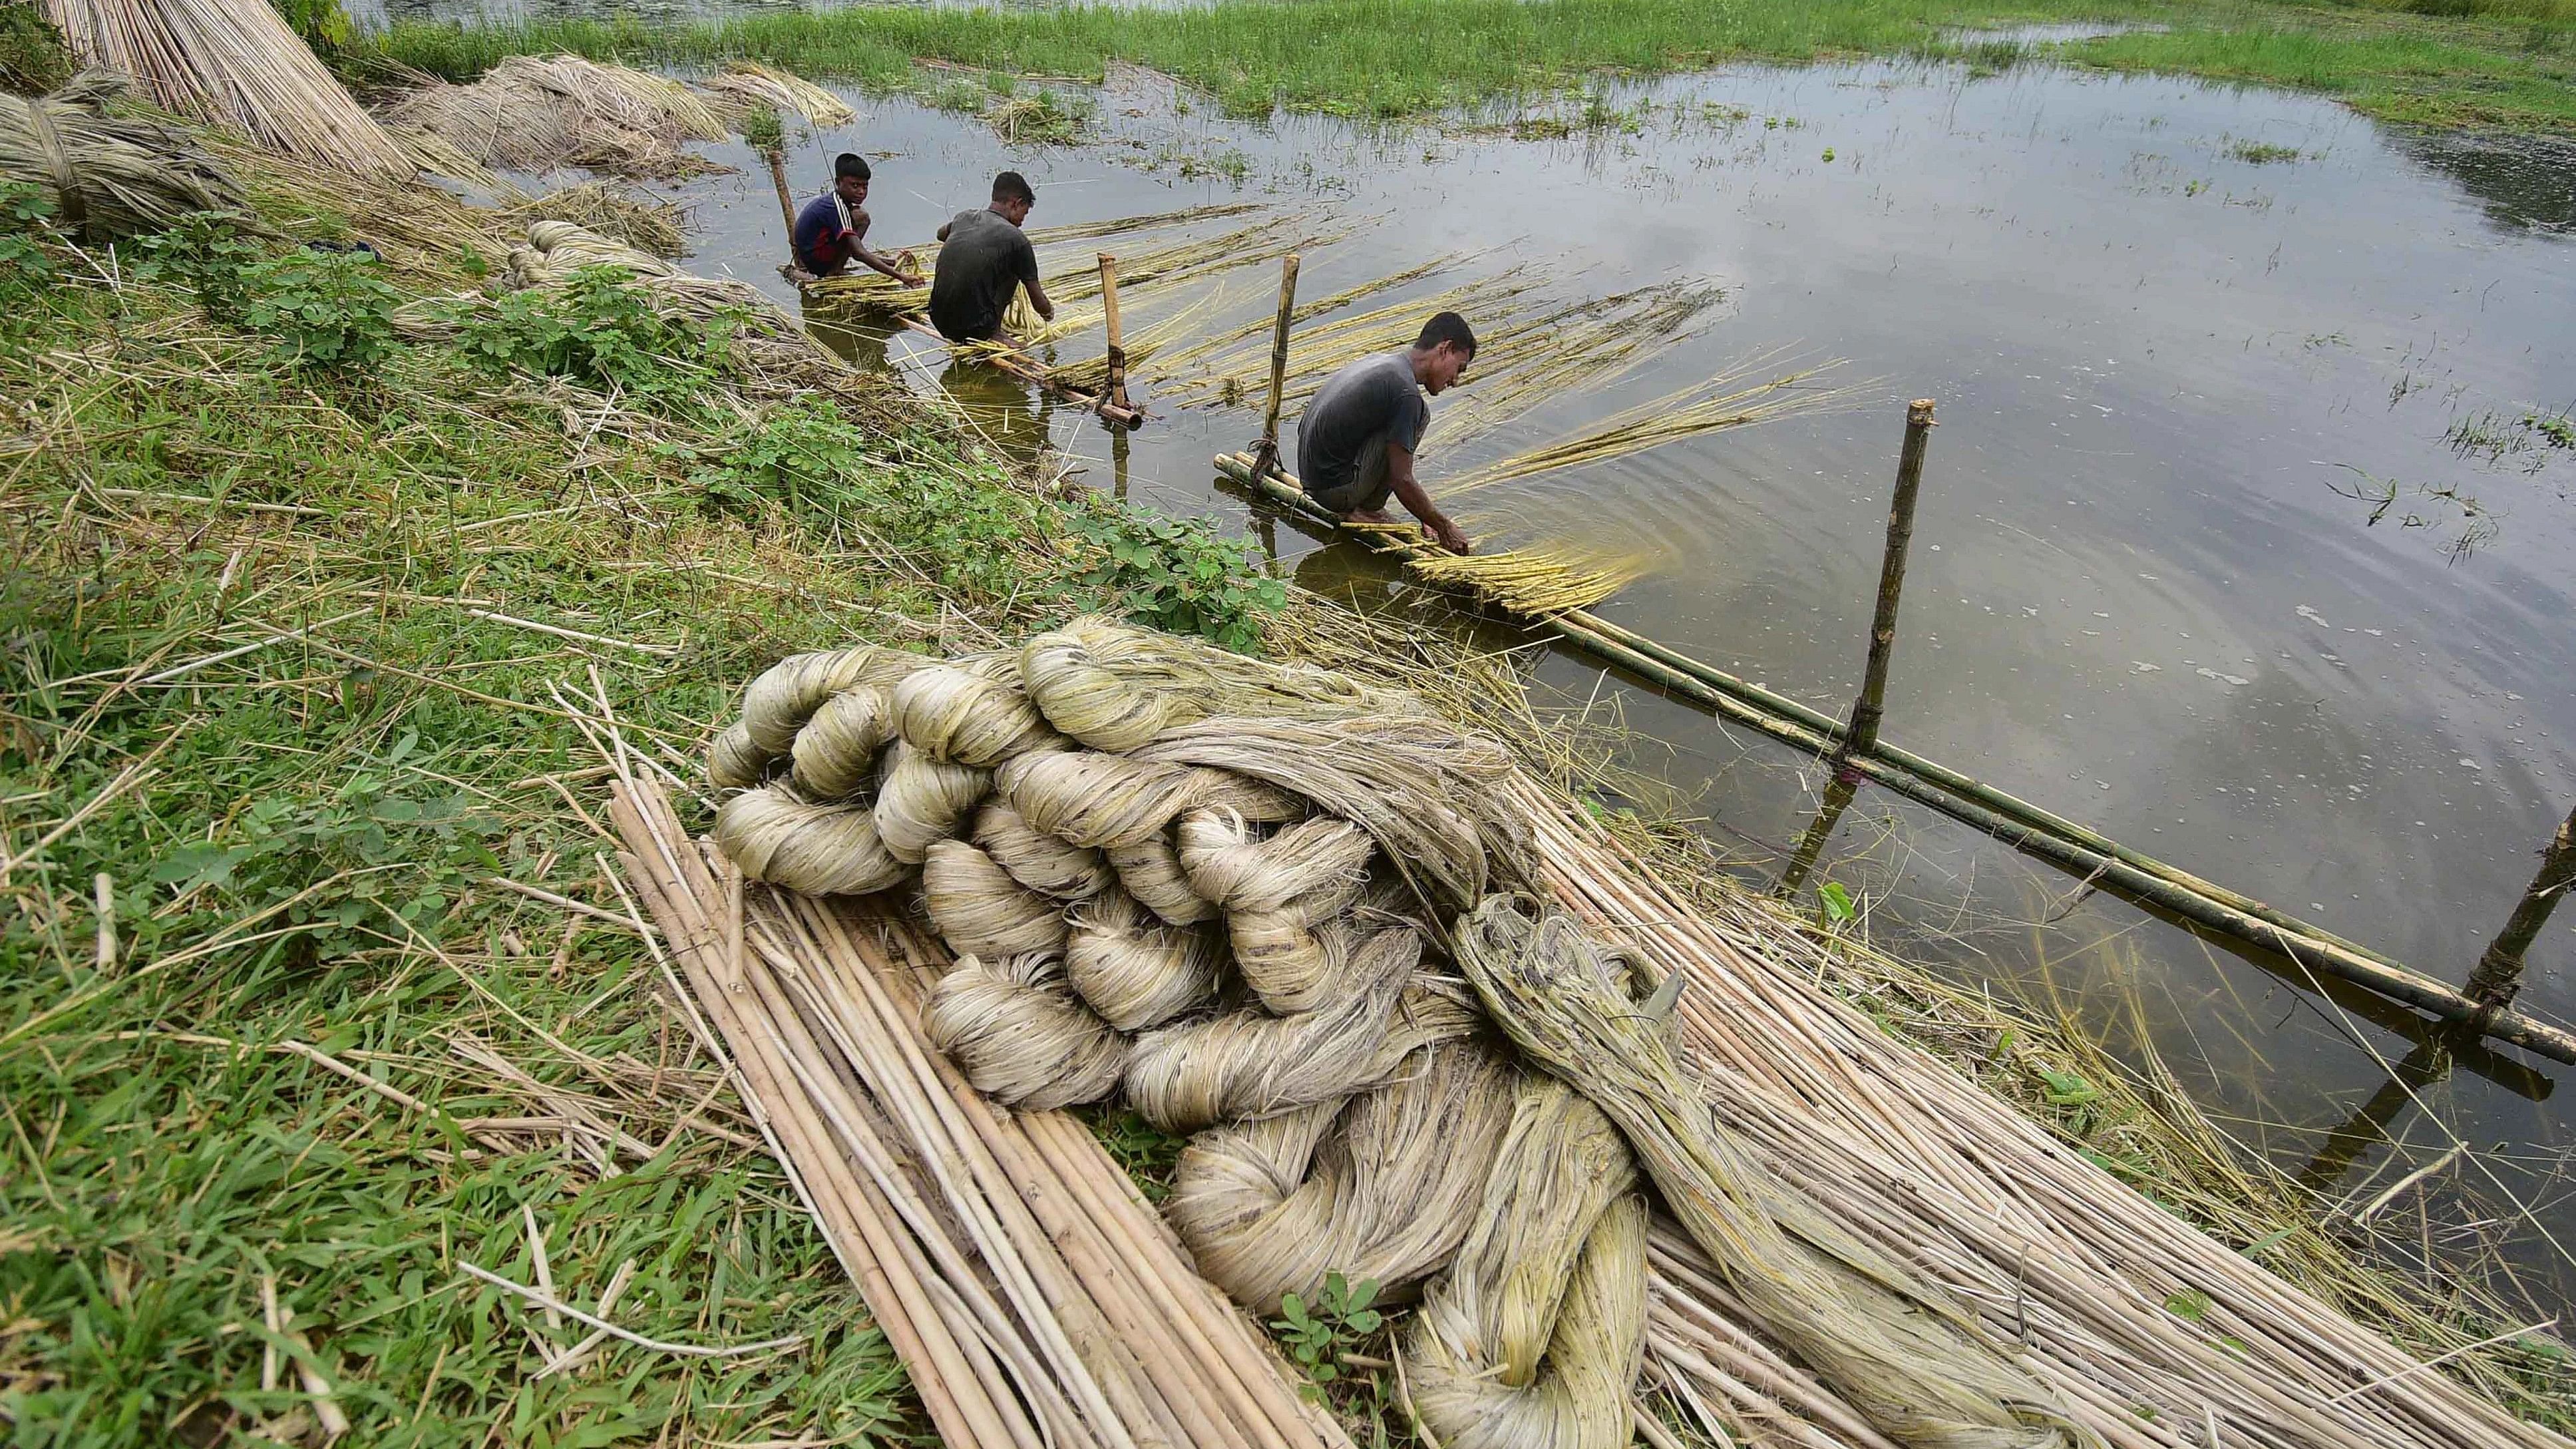 <div class="paragraphs"><p>Representative image showing farmers extracting fibres from jute plants.</p></div>